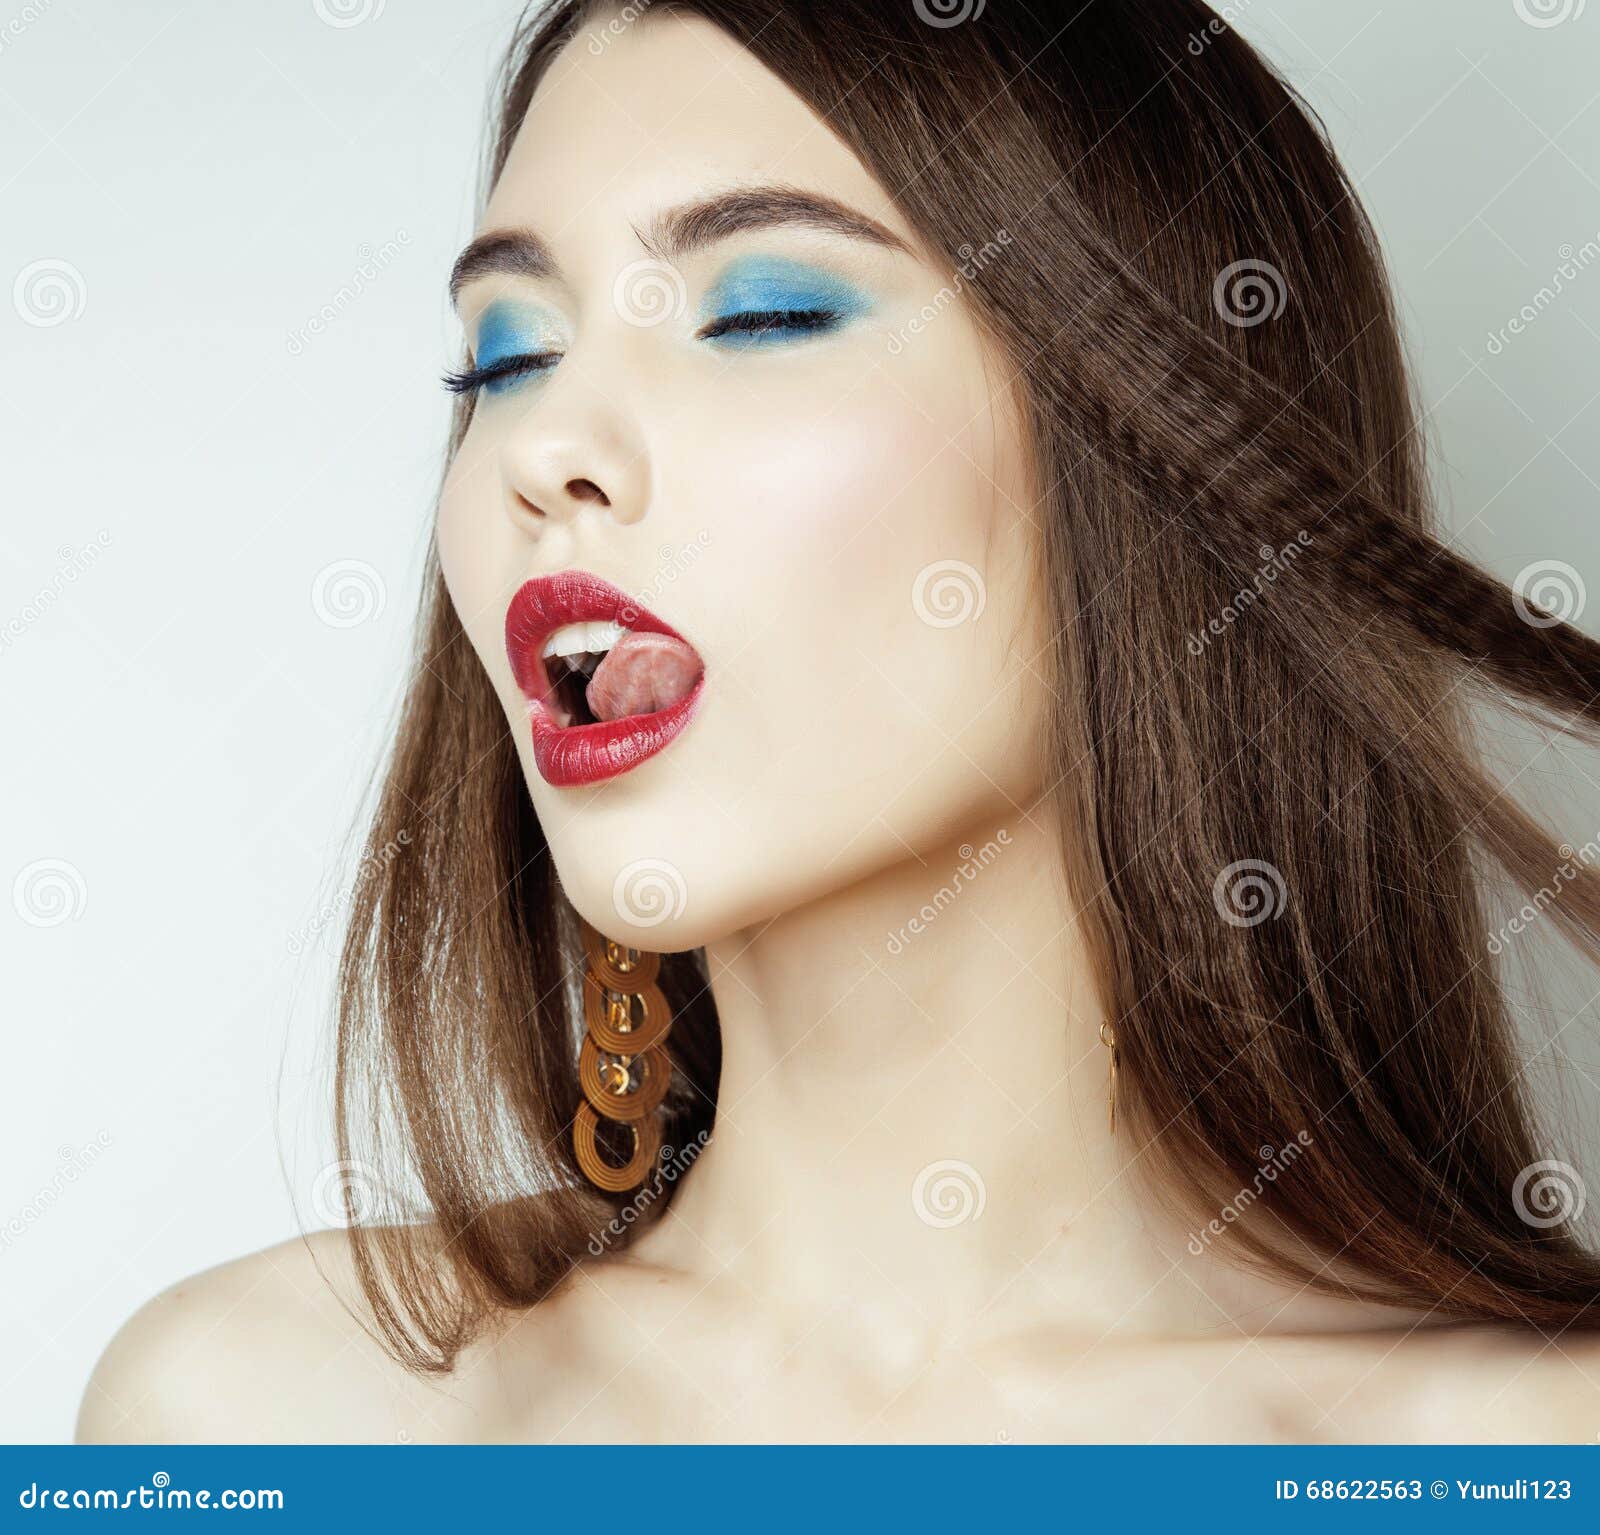 Beauty Girl With Red Lips And Nails Provocative Make Up